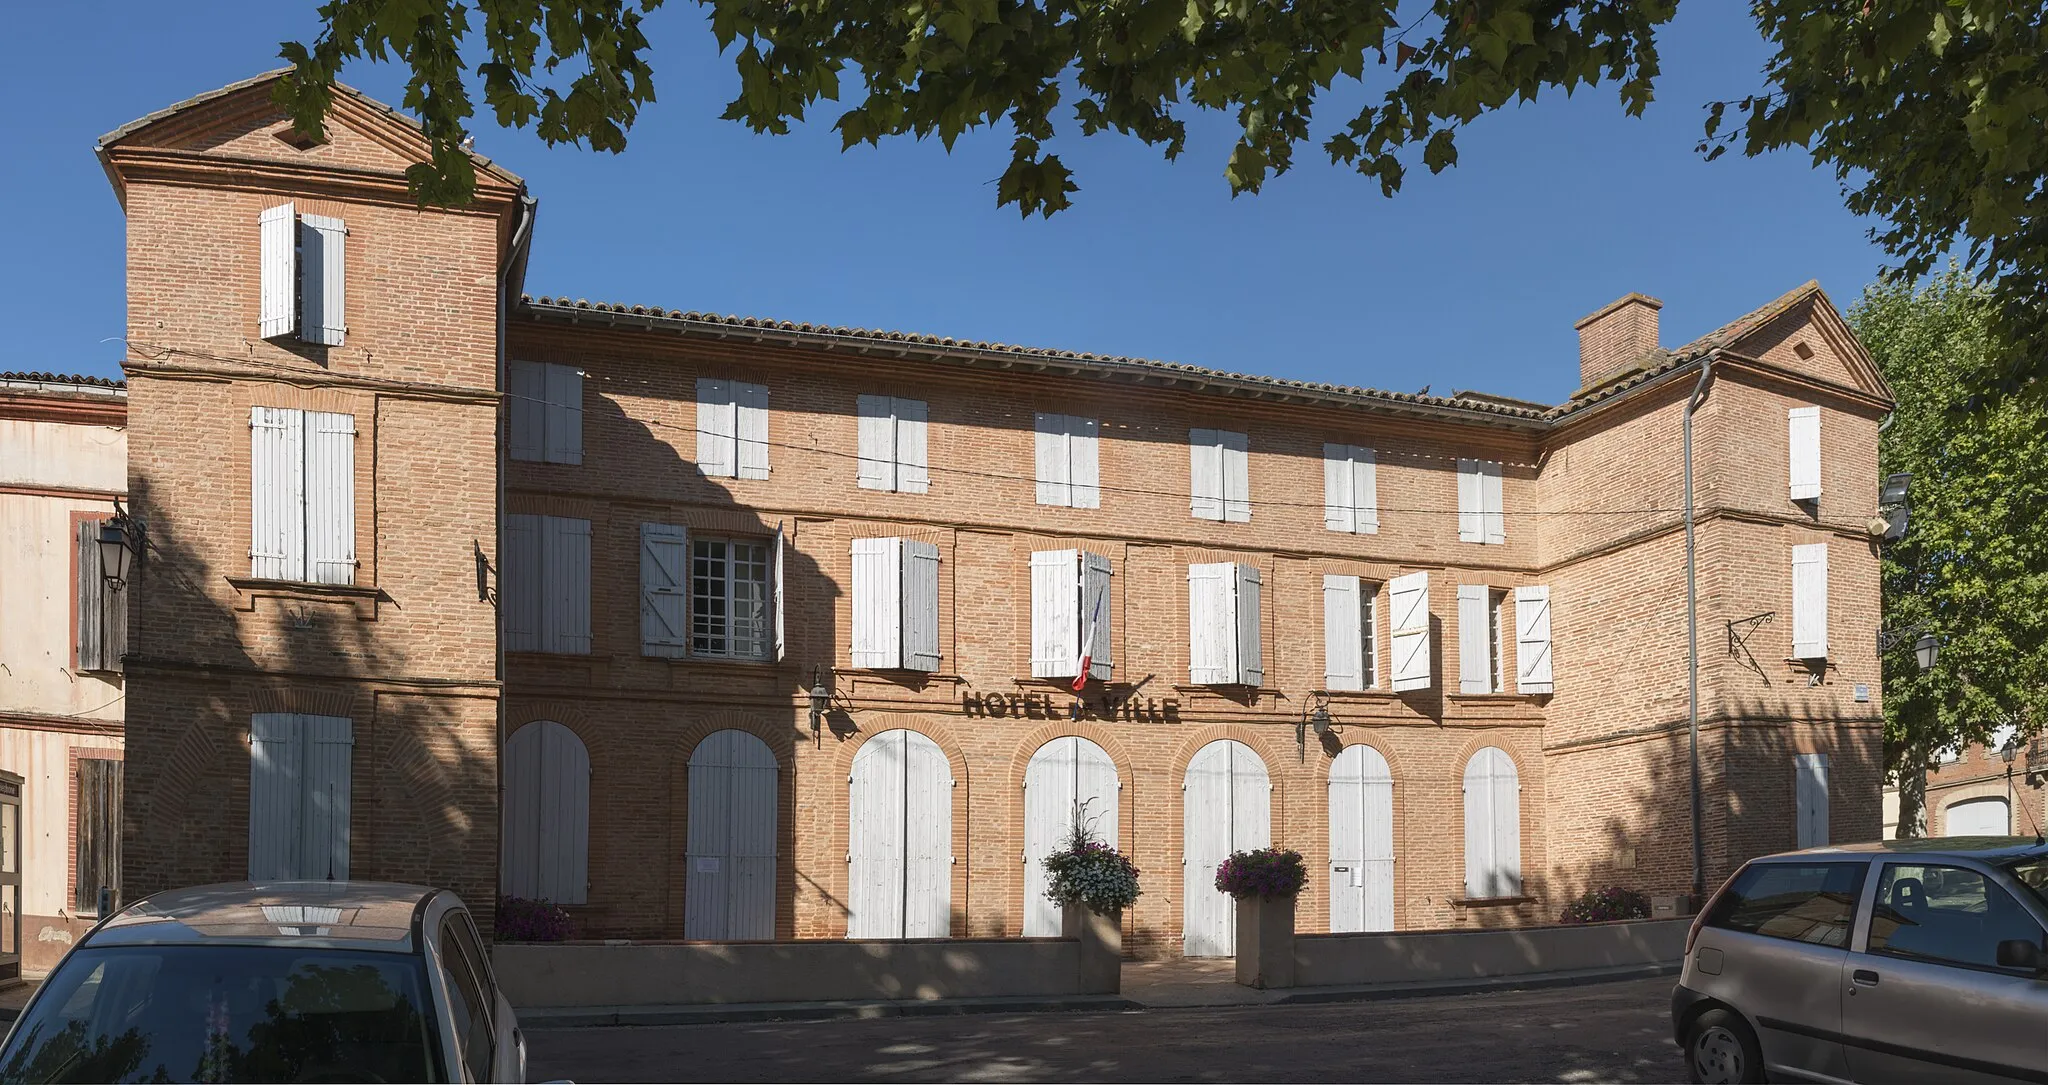 Photo showing: Fronton, Haute-Garonne, France. The town hall.